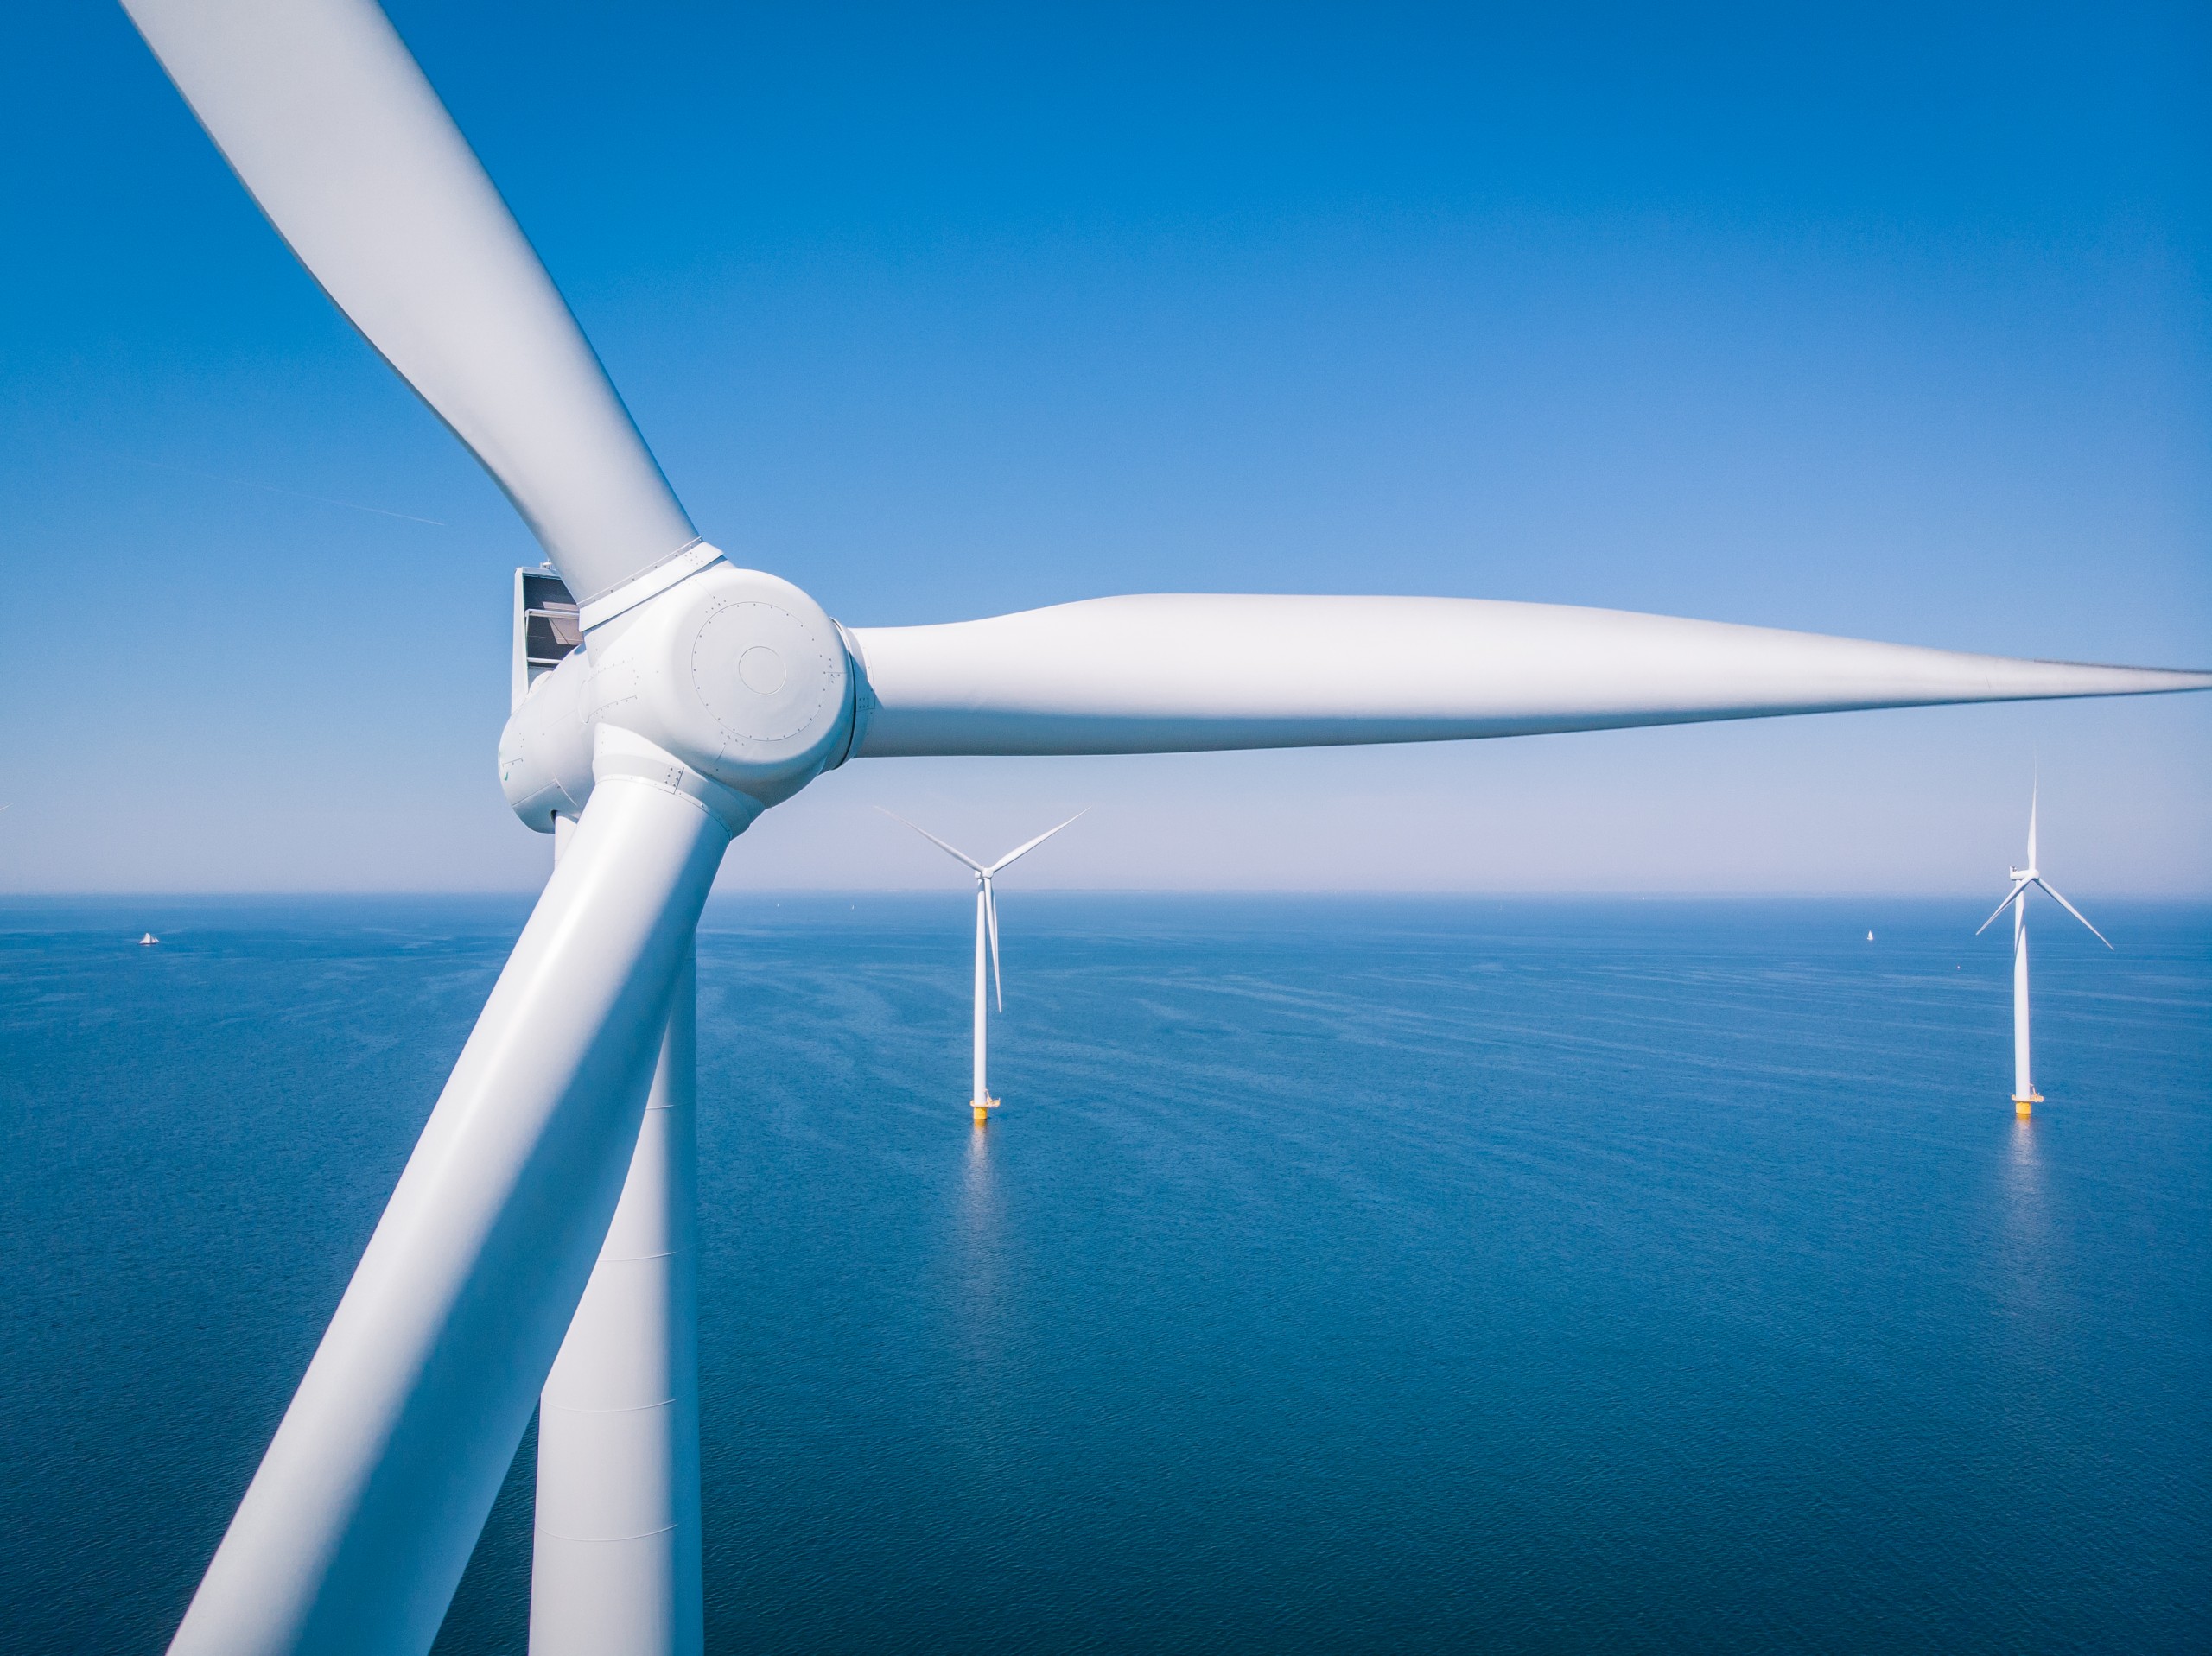 OWC to acquire Delta Wind Partners